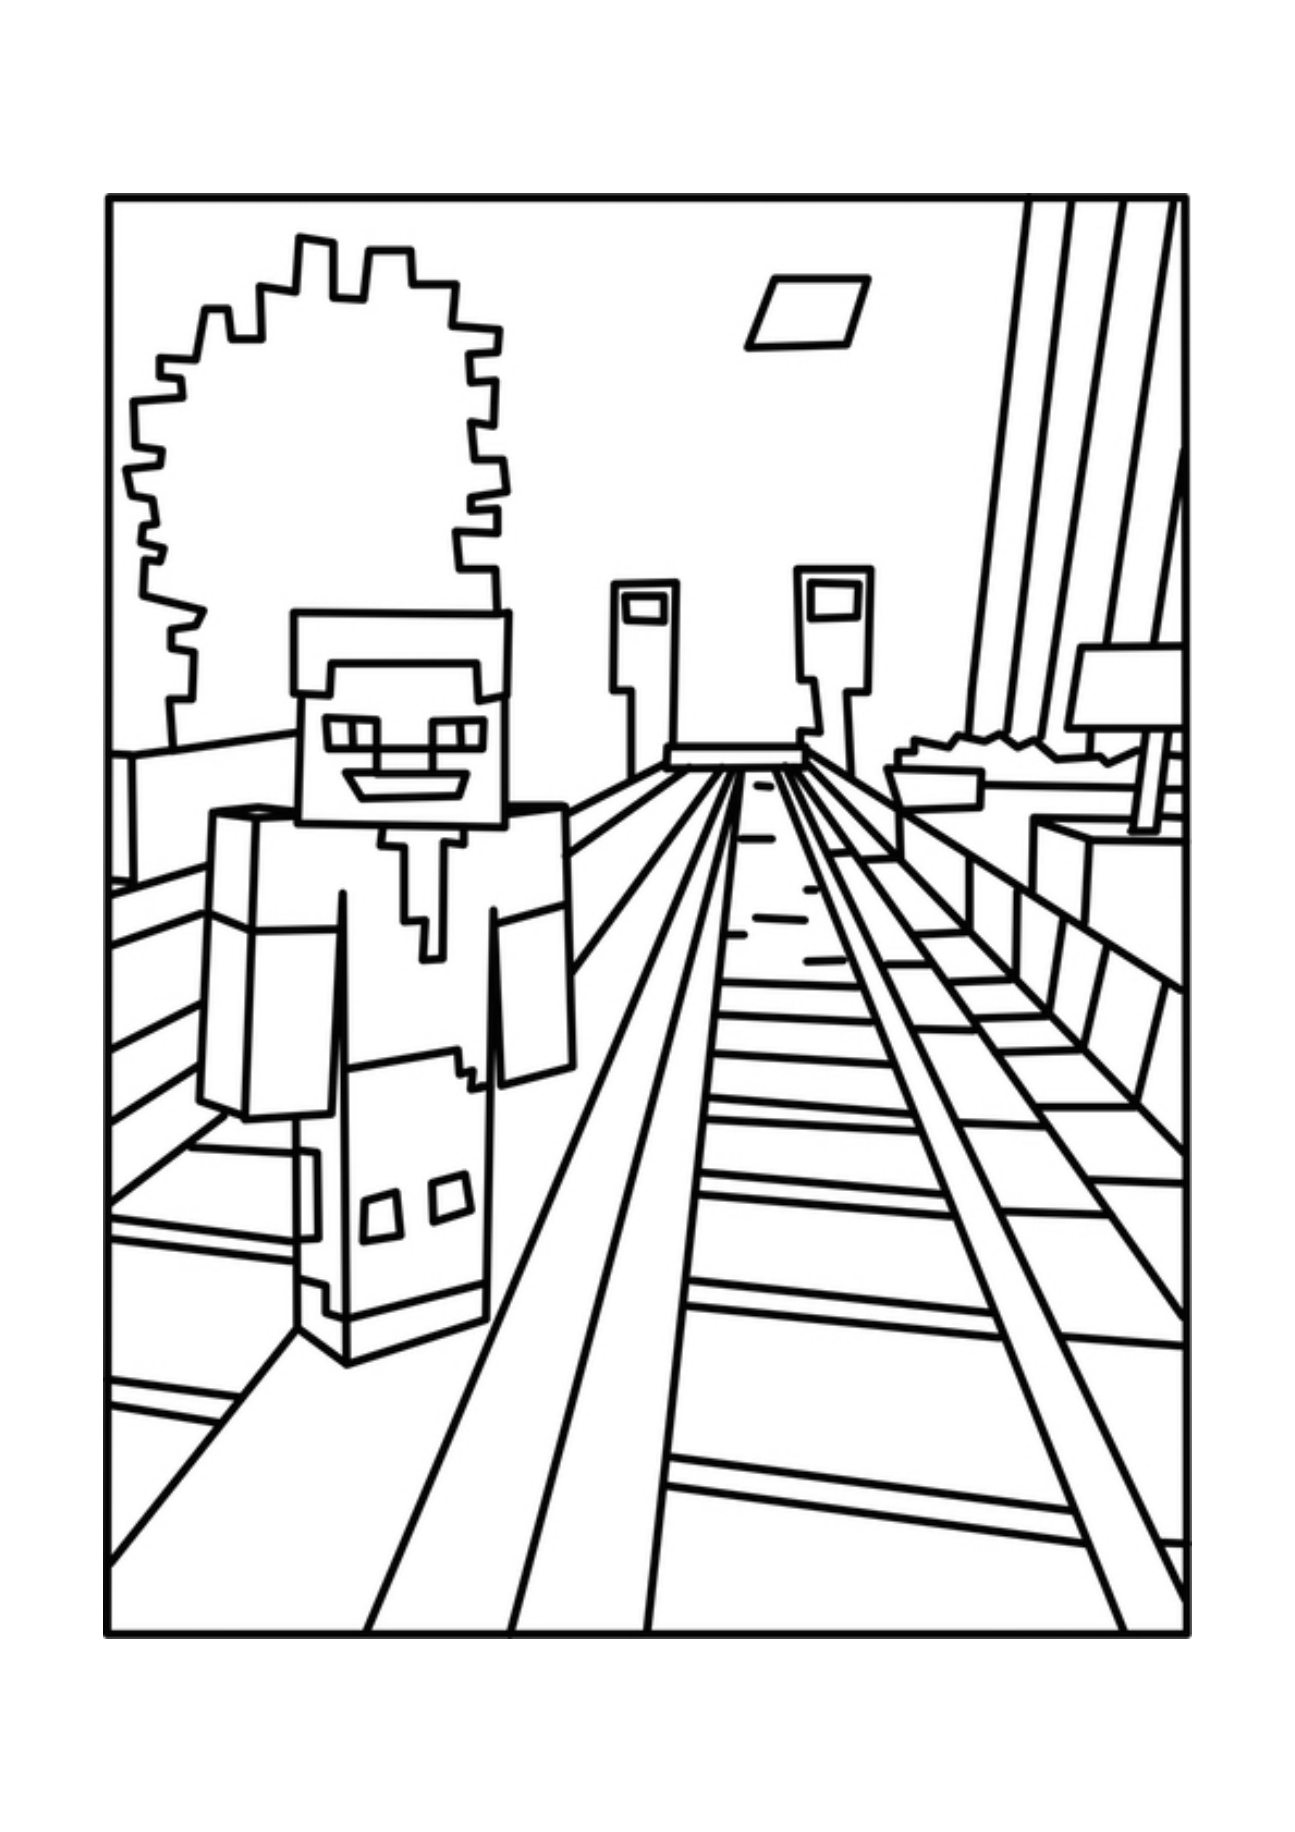 Coloring Pages : Minecraft Coloring Pages Dantdm Best Of ...